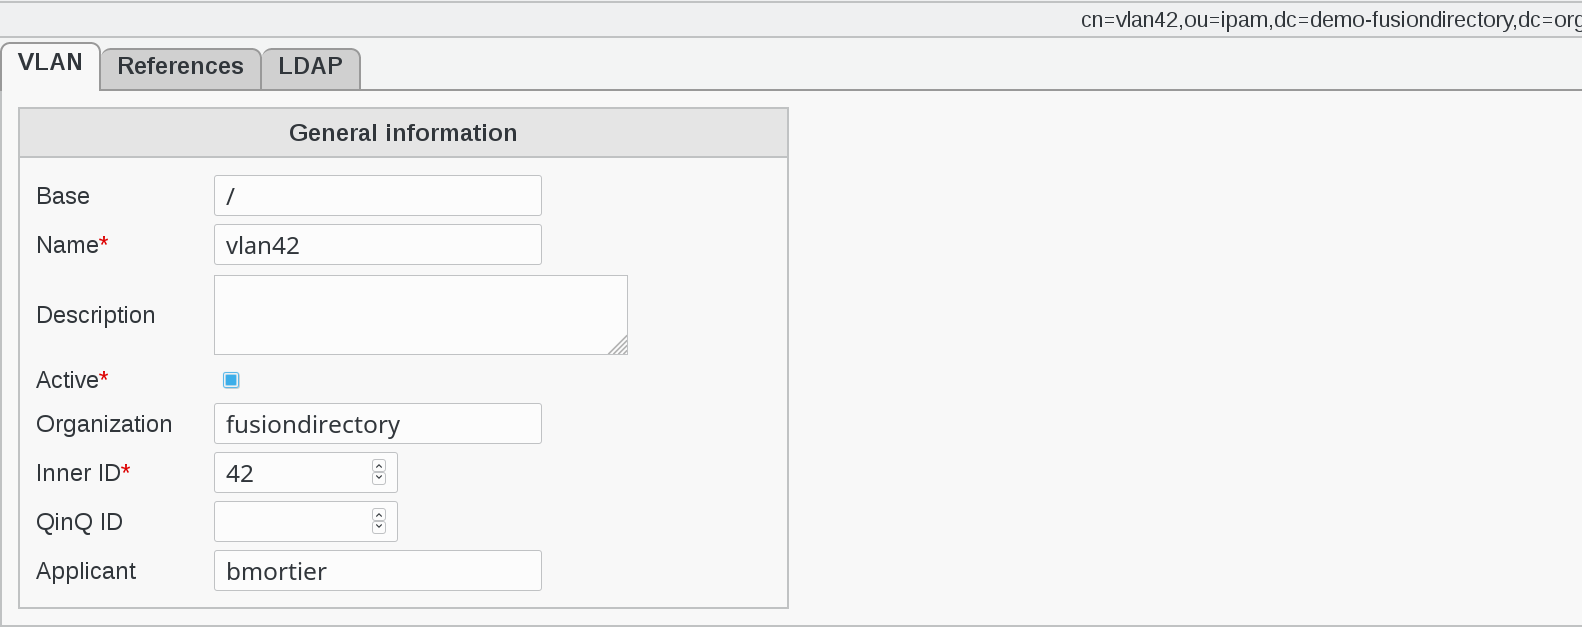 Picture of VLAN configuration page in FusionDirectory